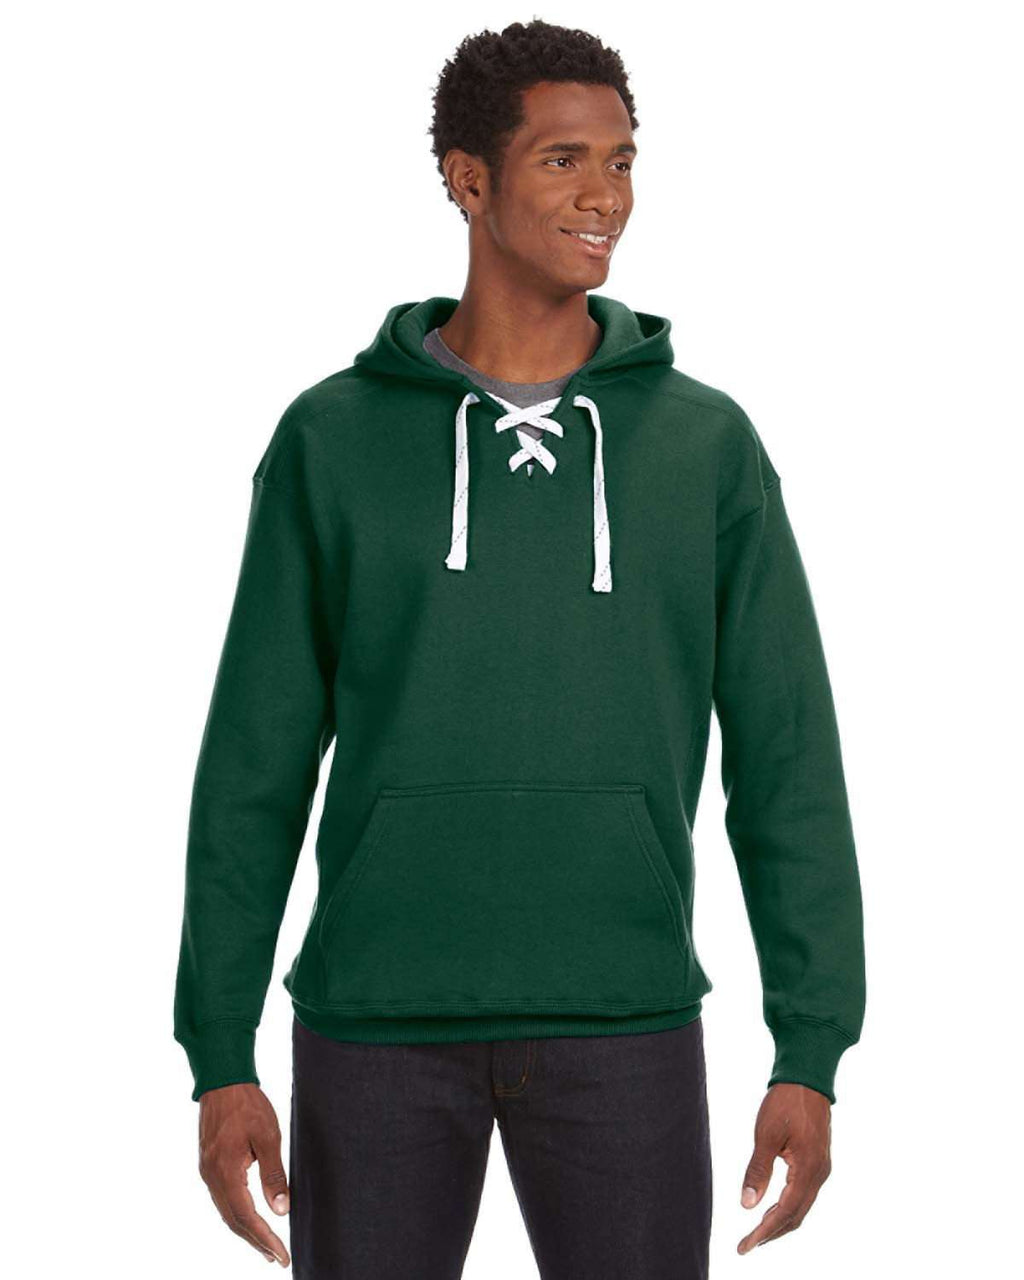 heavy weight hockey lace hoodie – Fitger's Brewhouse